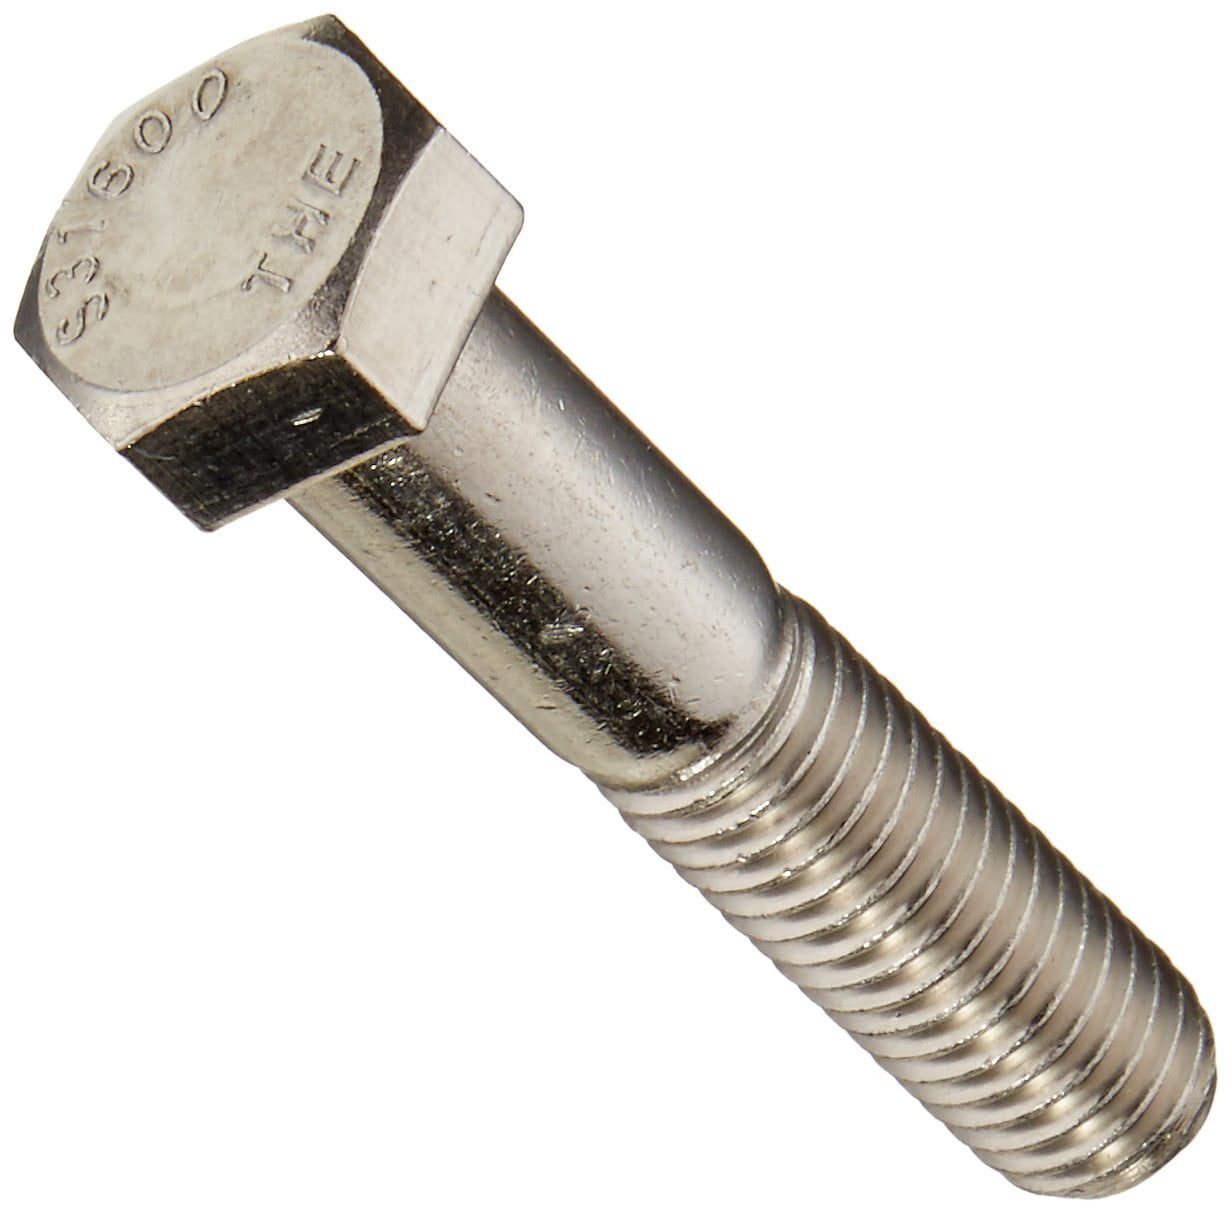 2 Units 316 Stainless Steel Carriage Bolt Screw 3//8/"-16 x 7/" Length